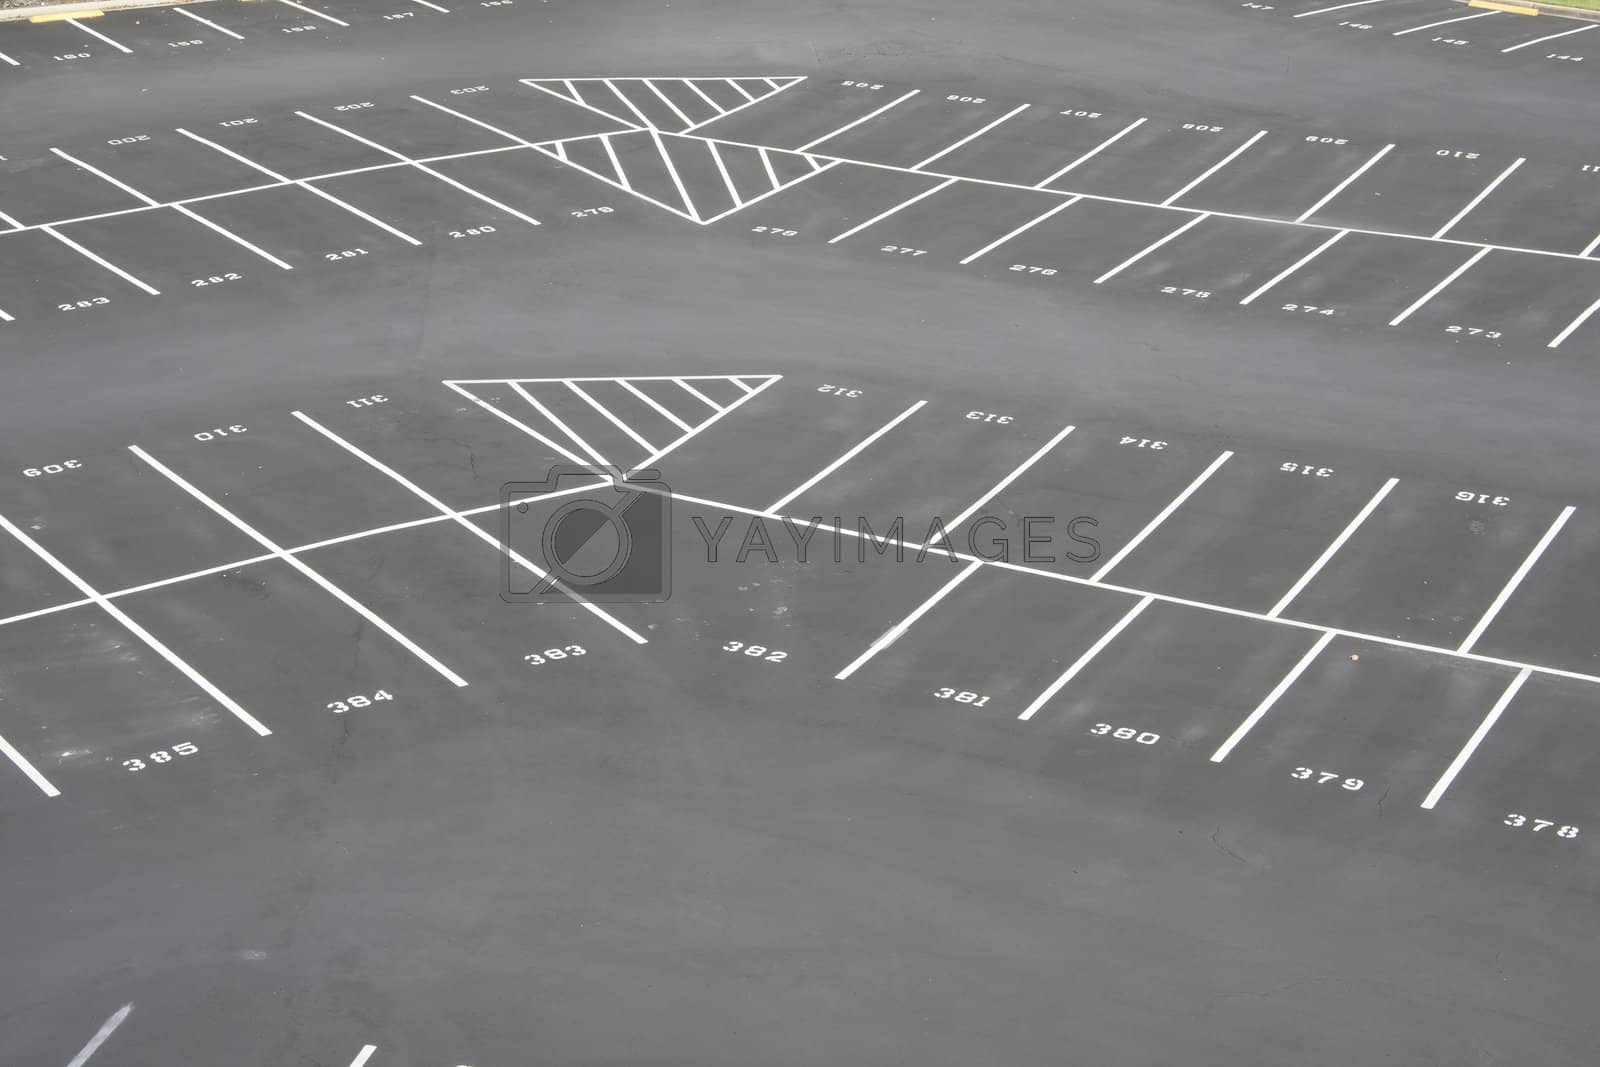 Royalty free image of large empy parking lot corner by lbarn